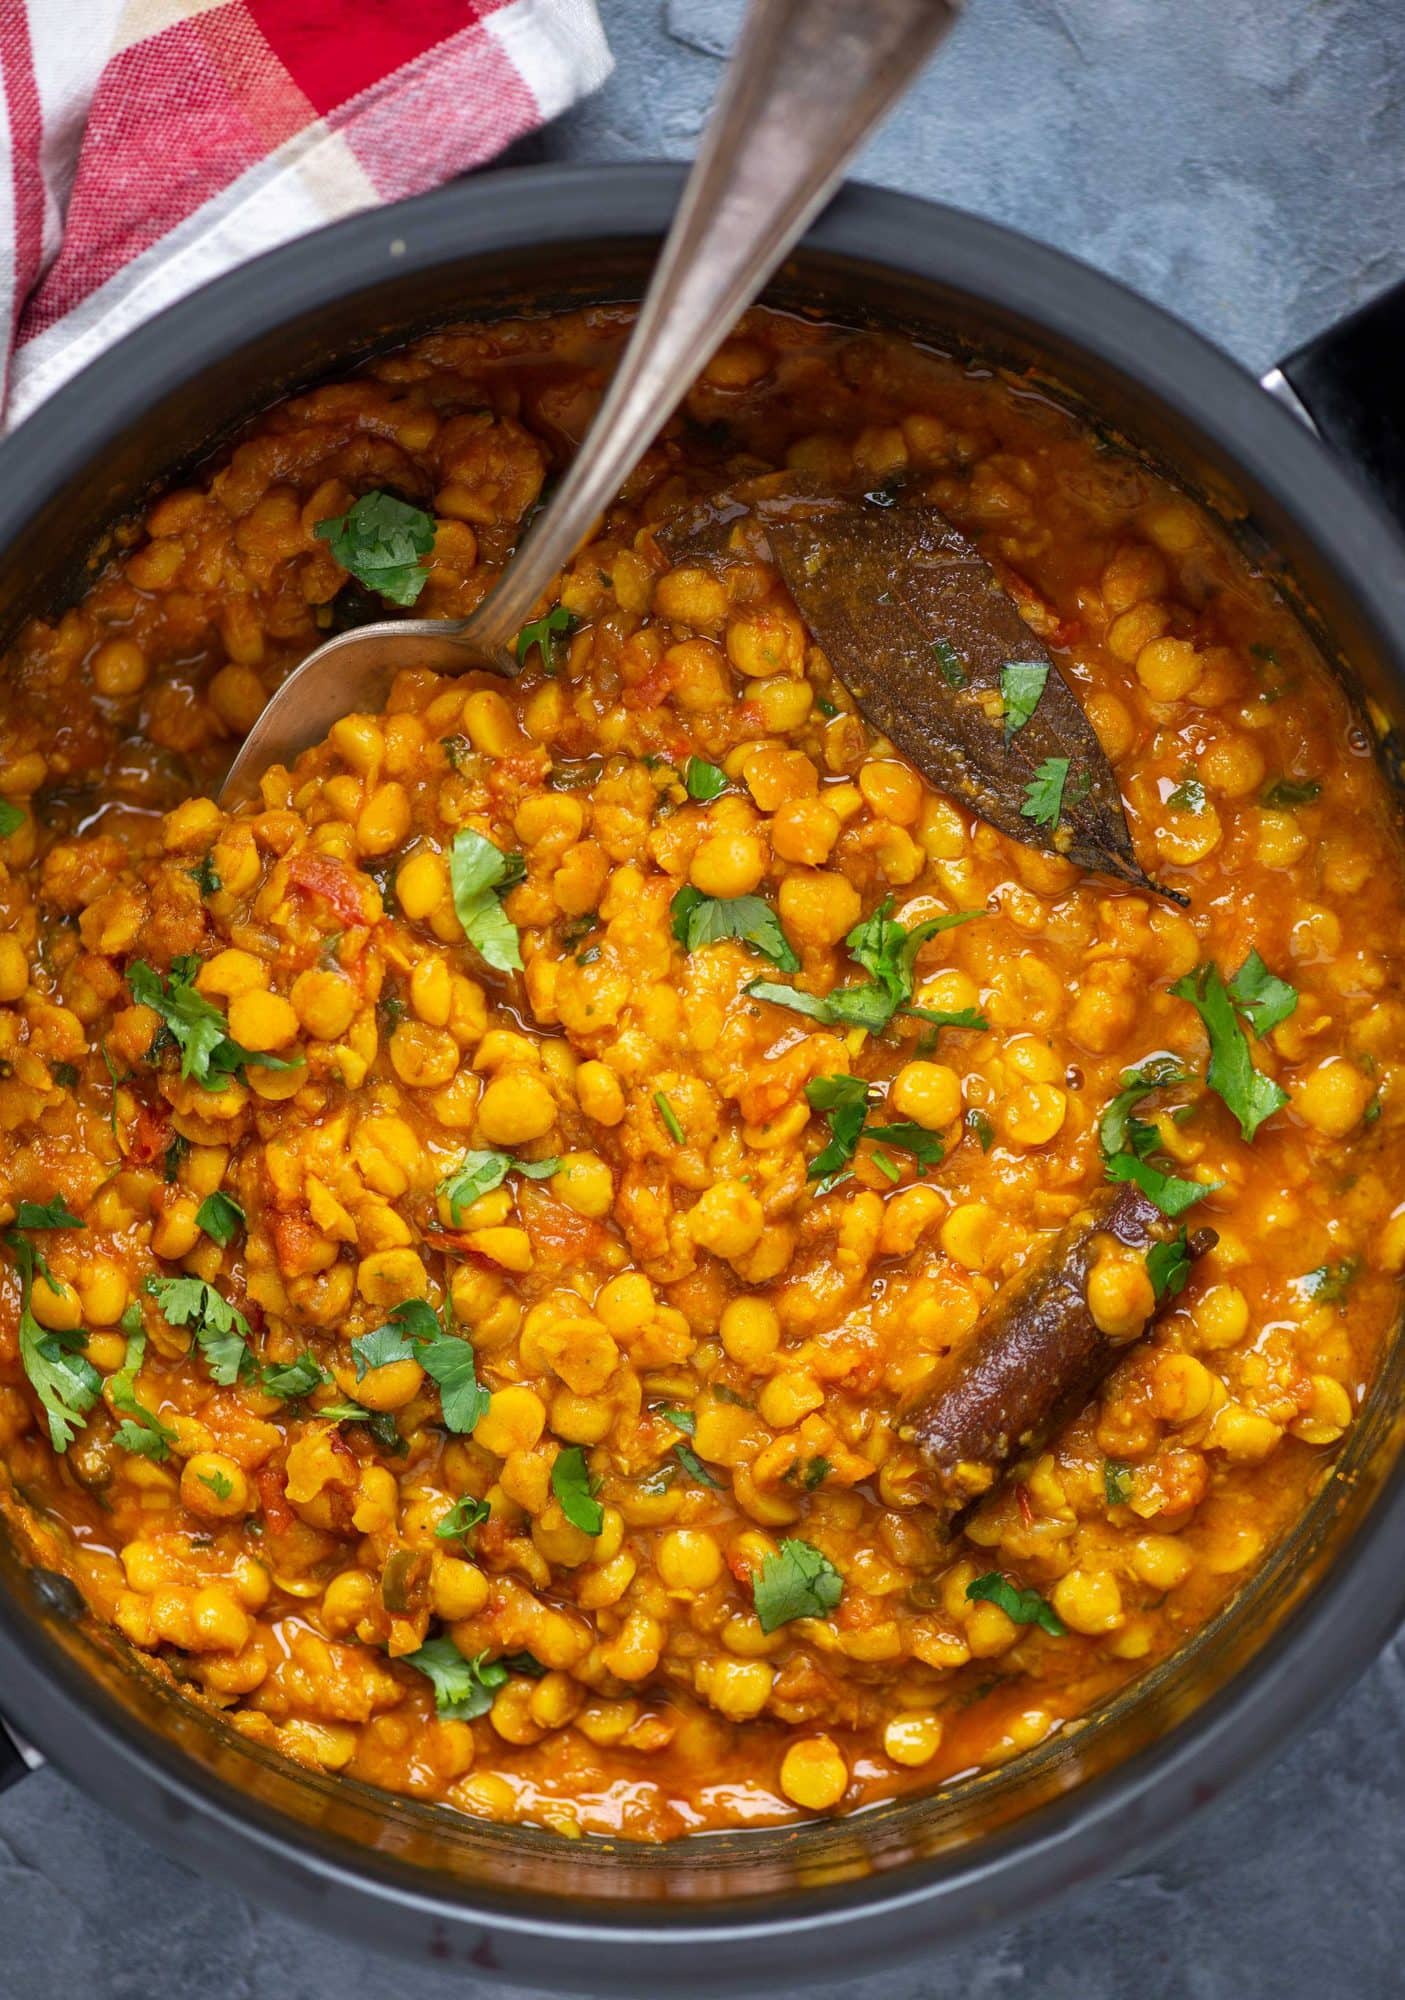 Chana dal garnished with coriander leaves and prepared with spices in a pressure cooker